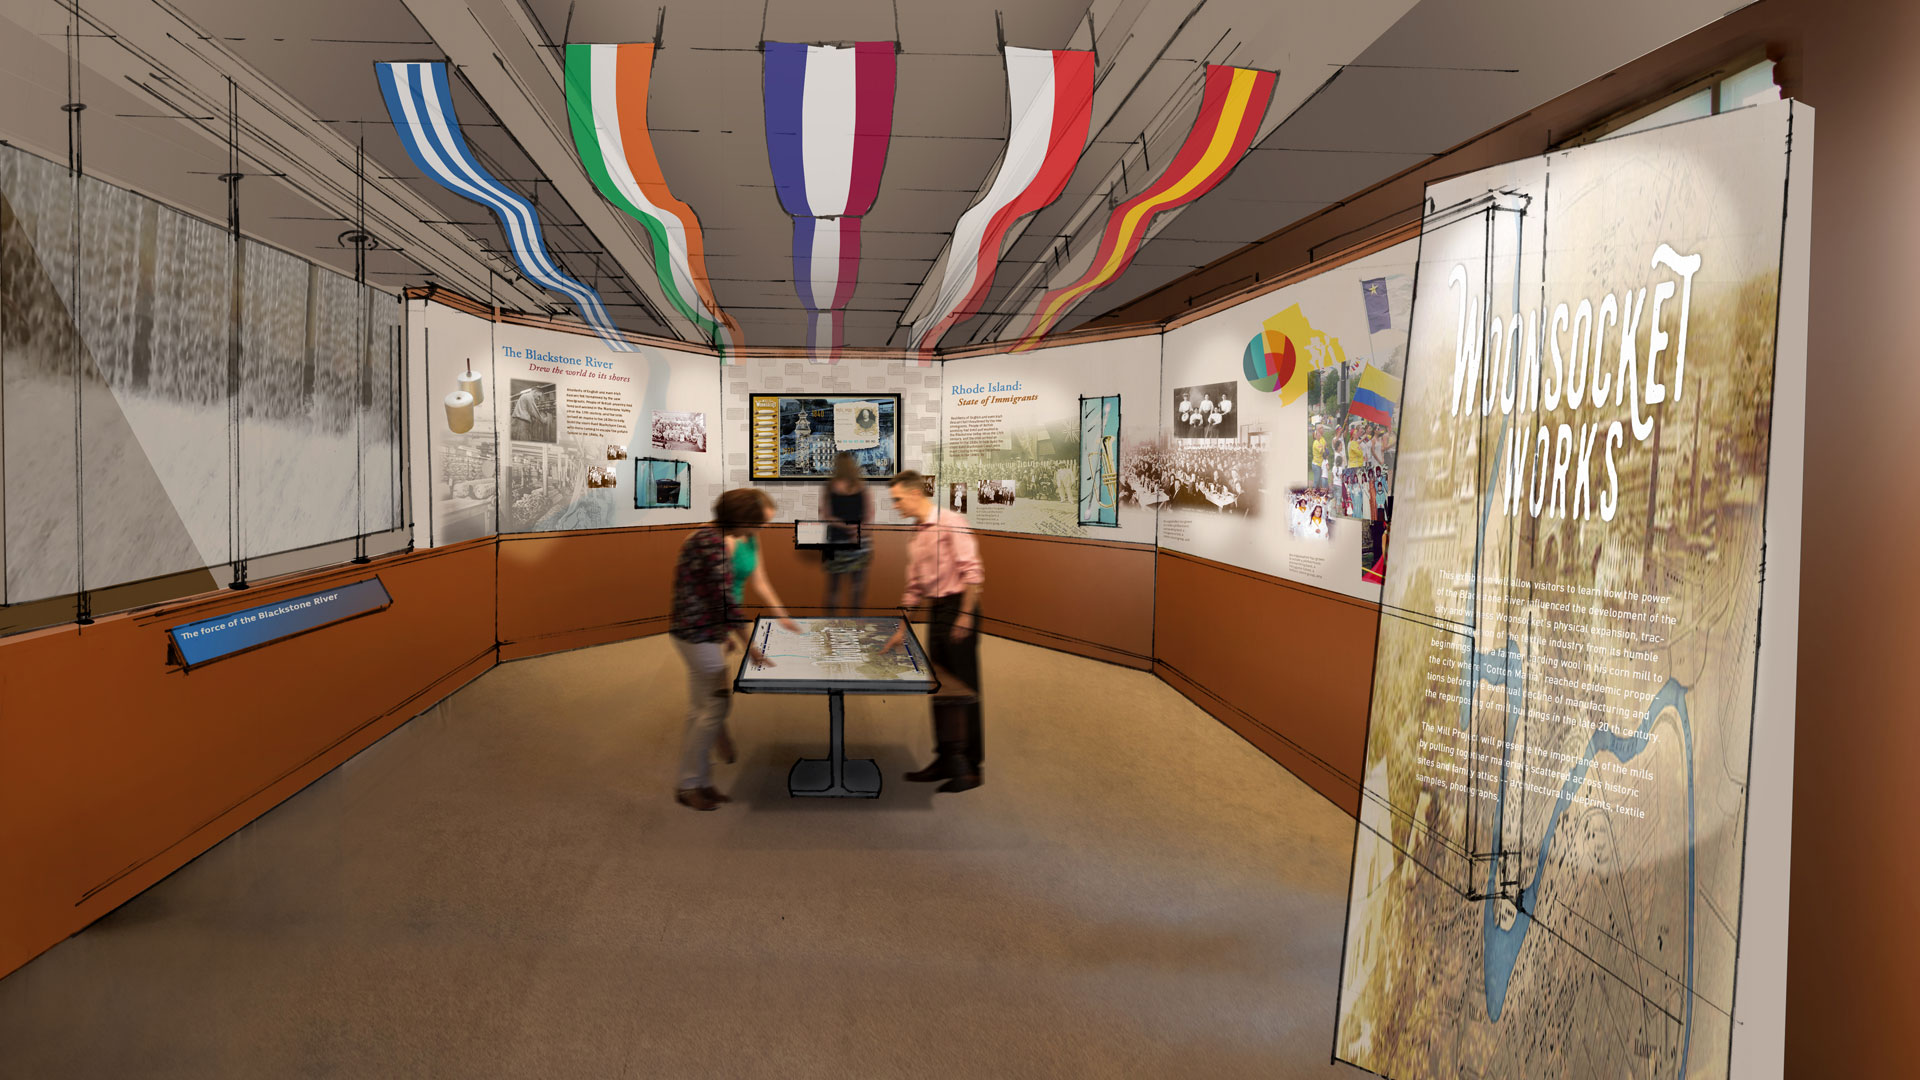 This multi-touch gestural interface exhibit uses the Blackstone River as a metaphor for change; visitors learn about how the mills changed the historical landscape of Woonsocket, RI. The interface allows multiple users to access a series of maps tapping into deeper content depending on the visitor’s interest.